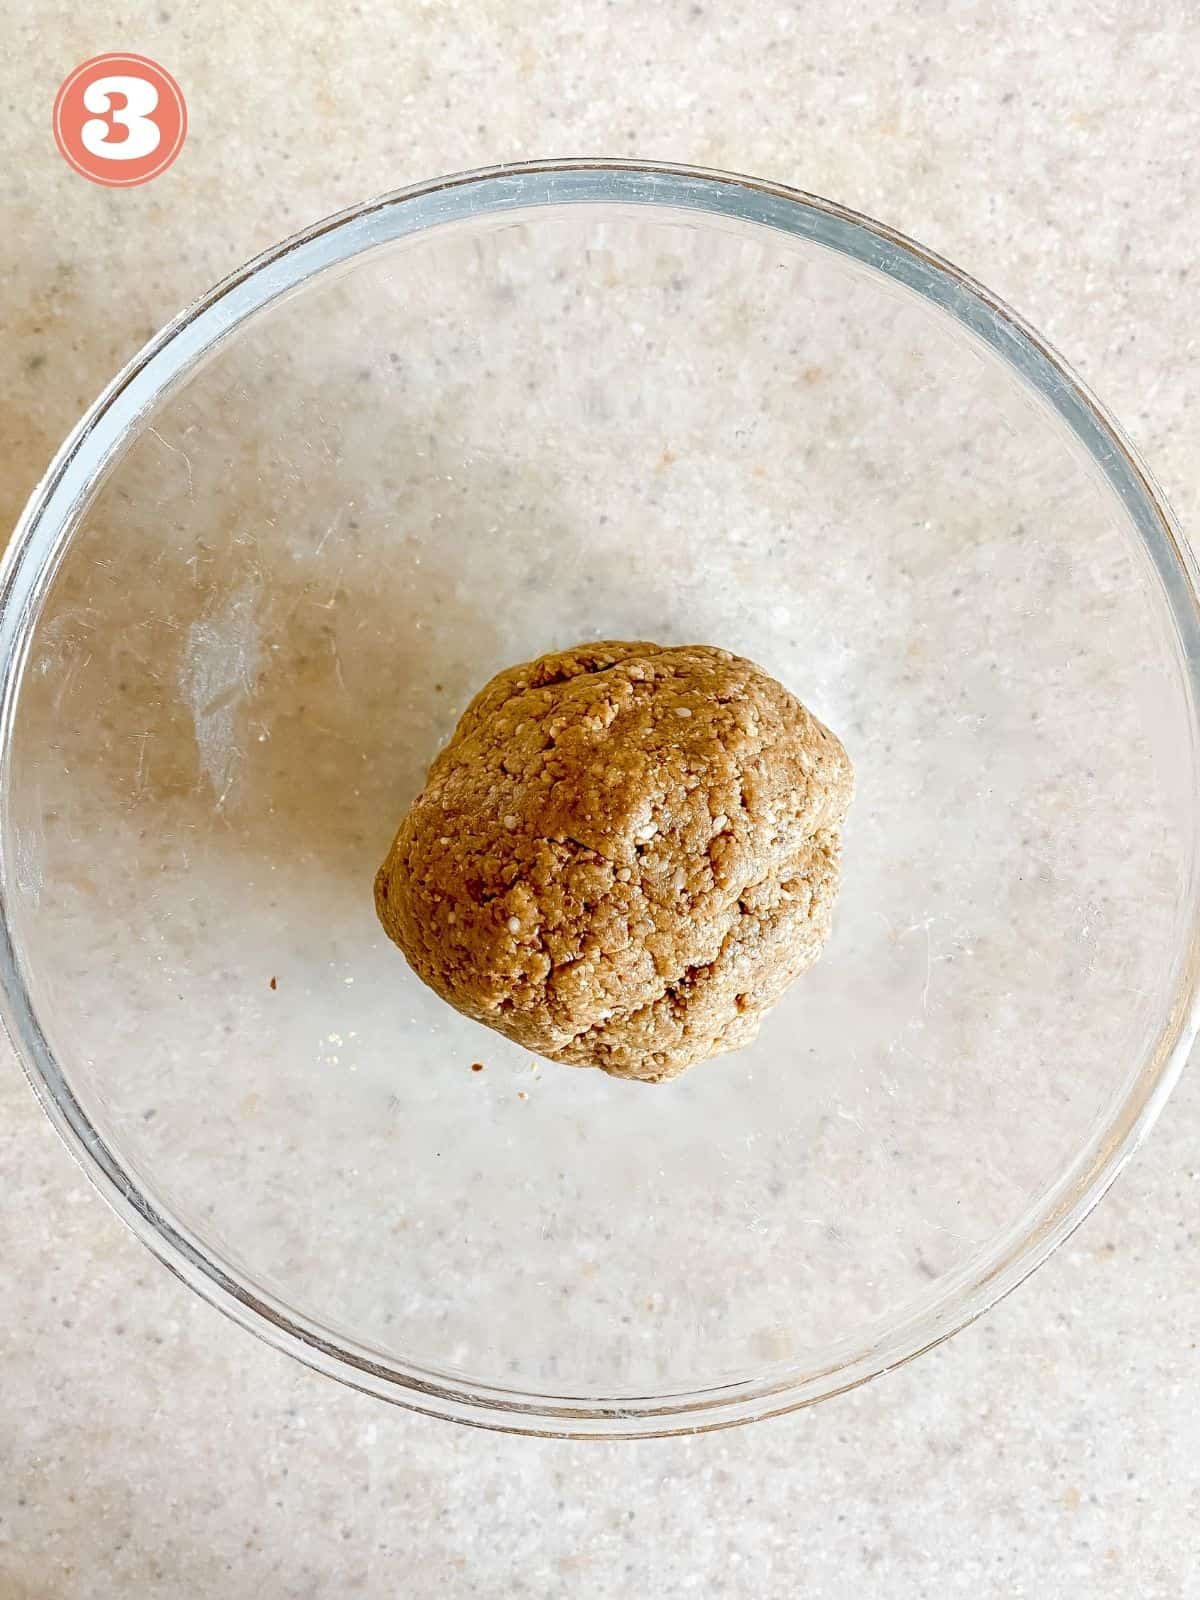 ball of energy ball dough in a glass bowl.